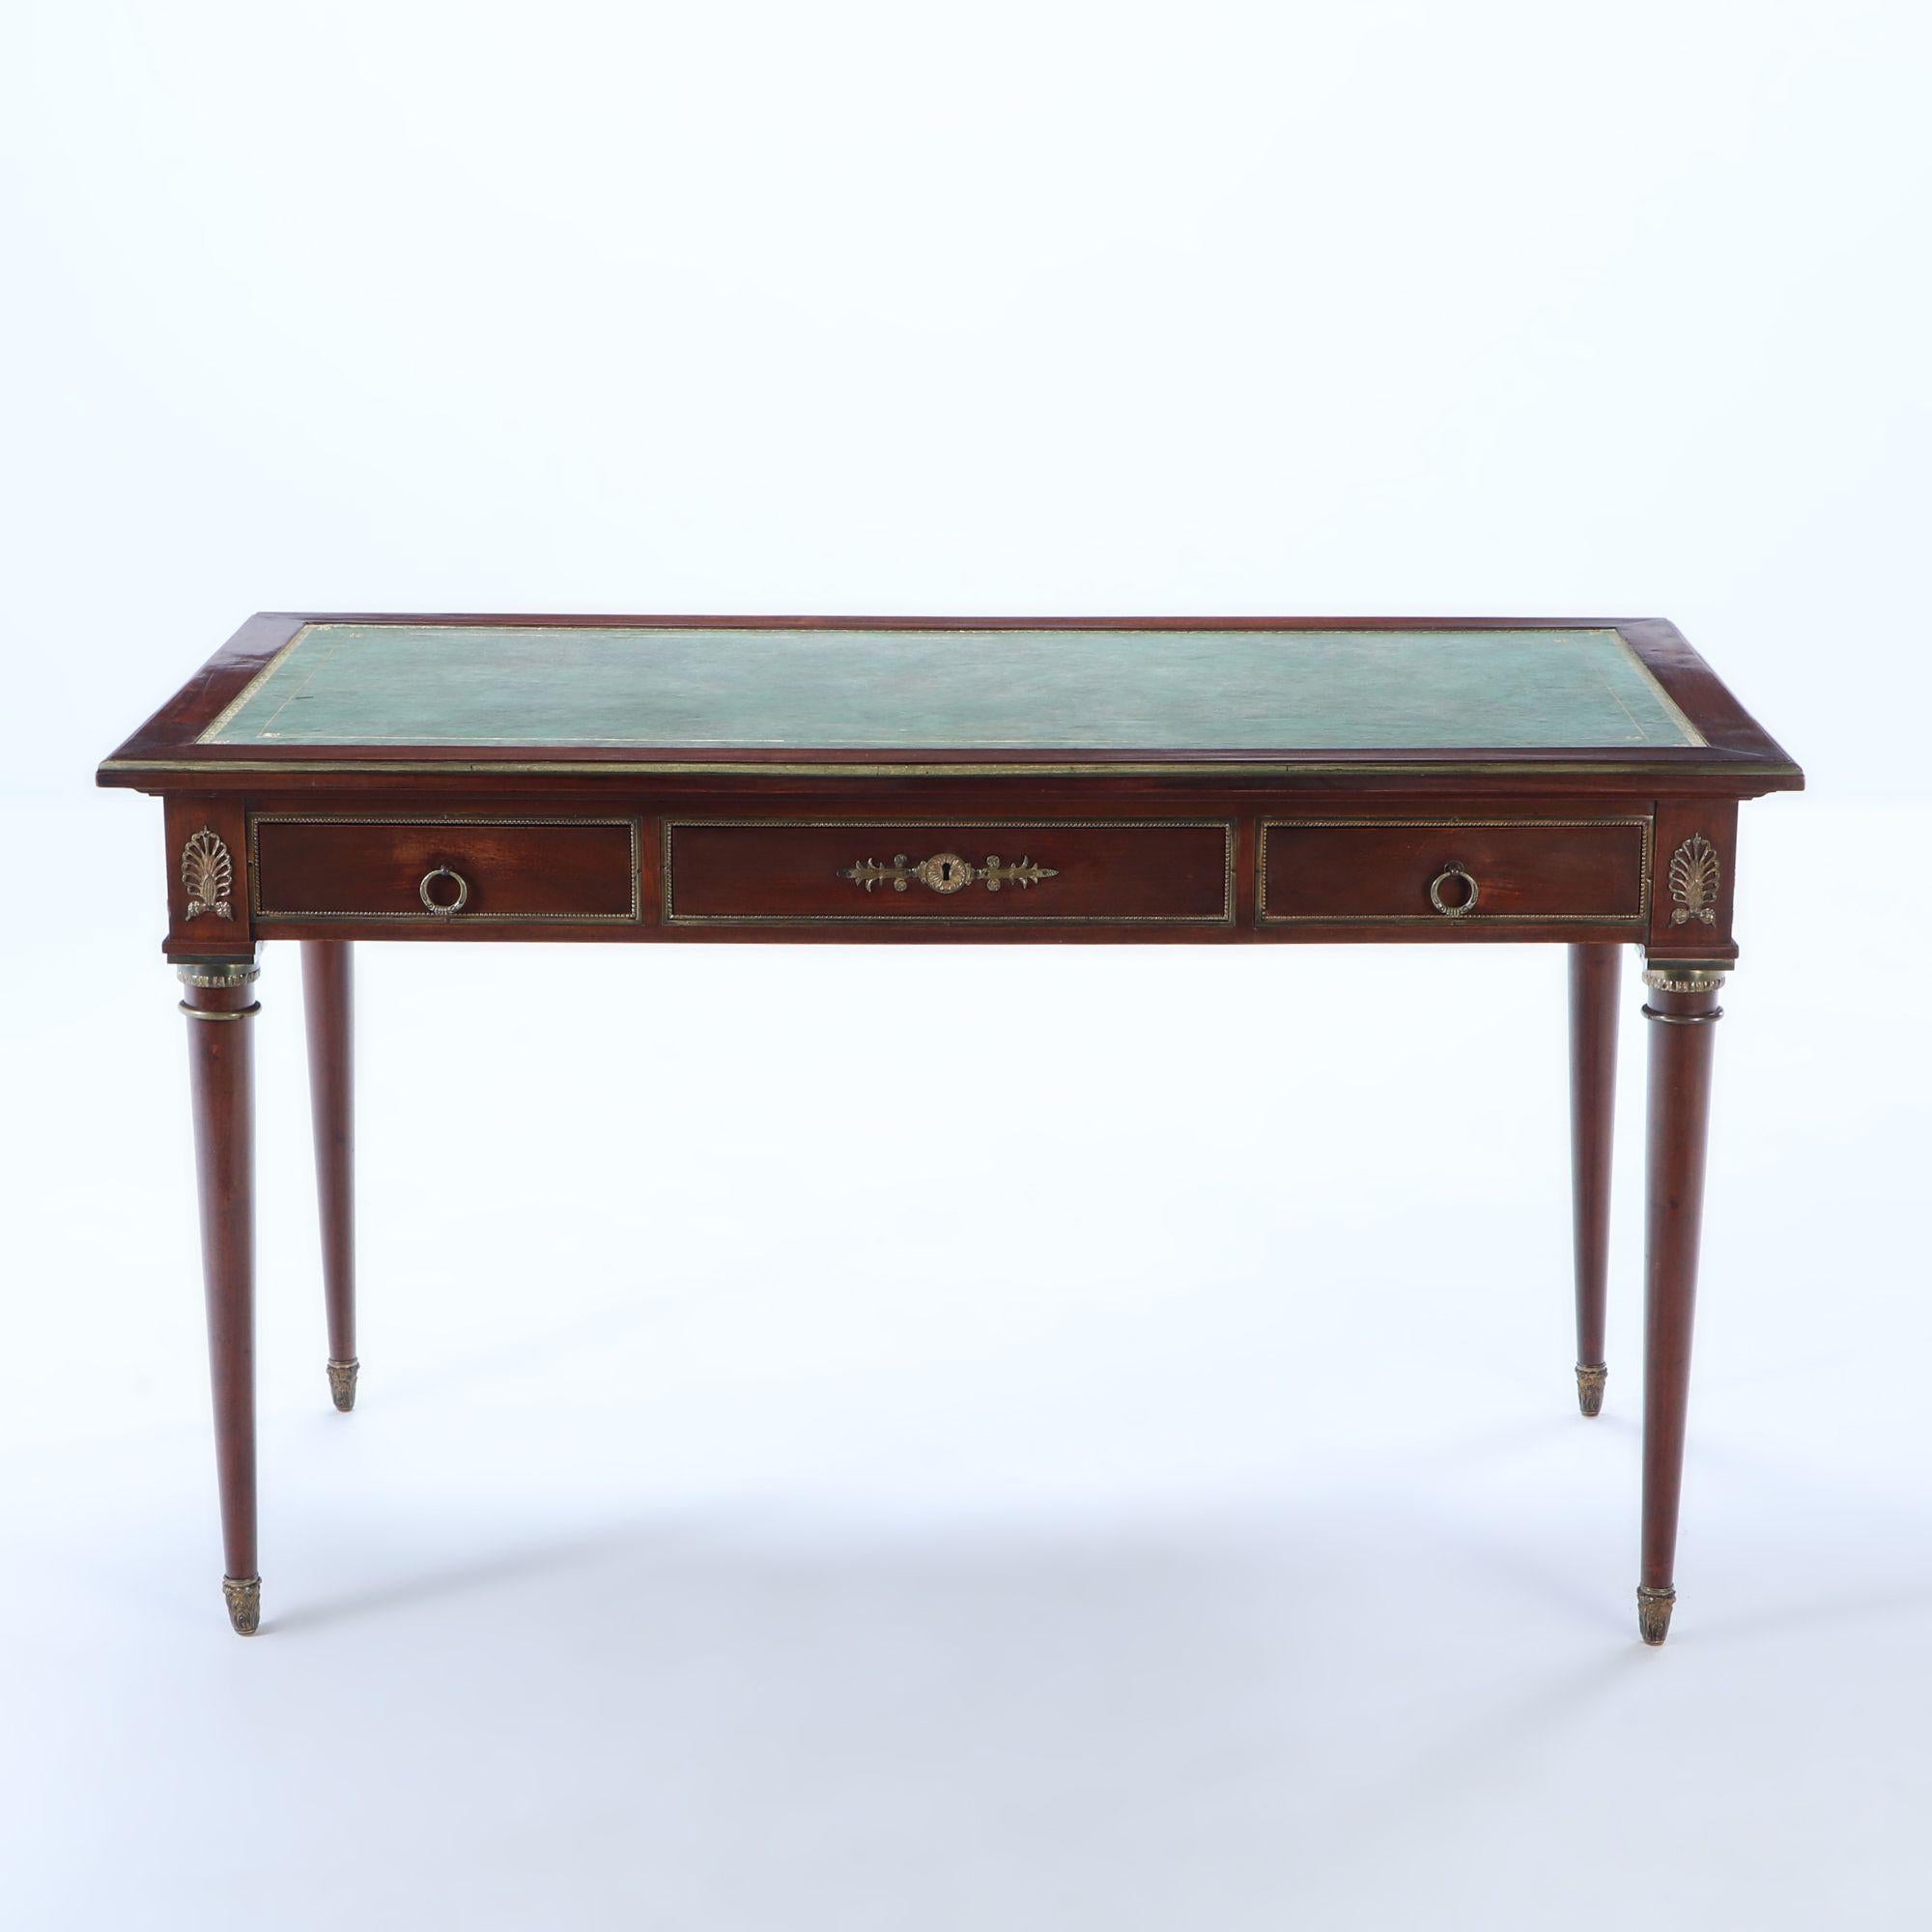 A French Empire style mahogany bronze mounted writing desk with leather top, circa 1940.